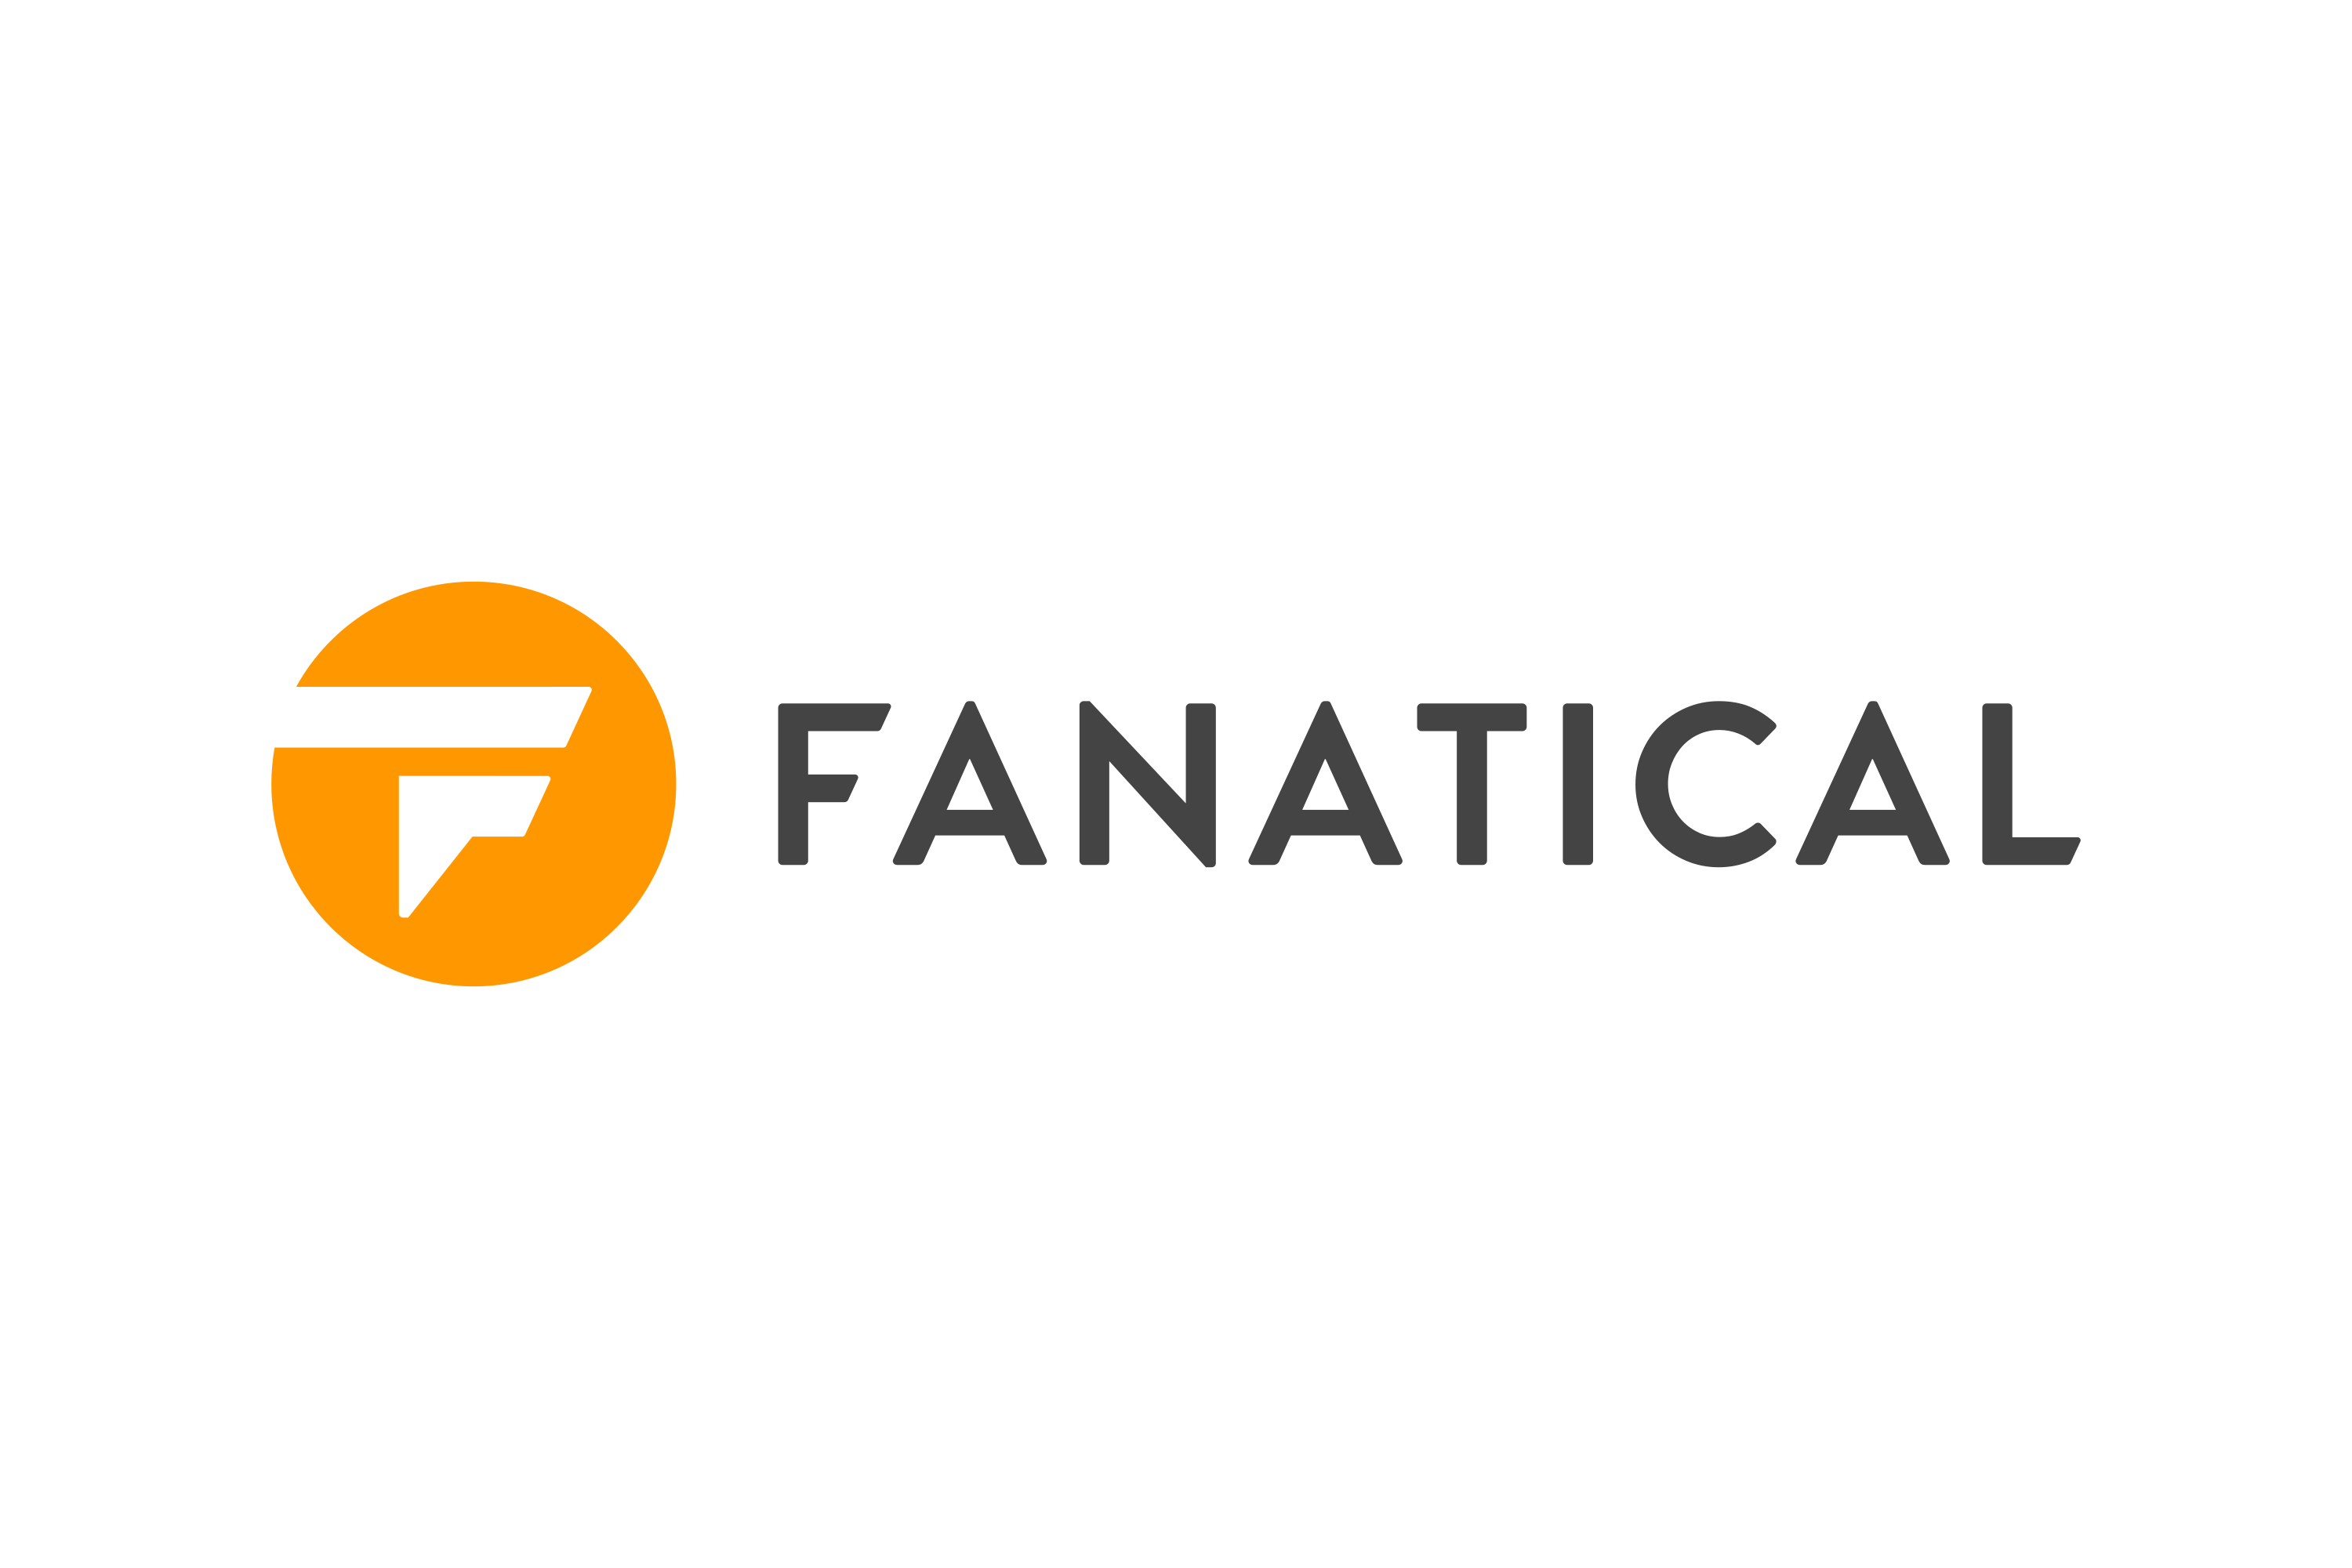 Download Fanatical Logo in SVG Vector or PNG File Format - Logo.wine